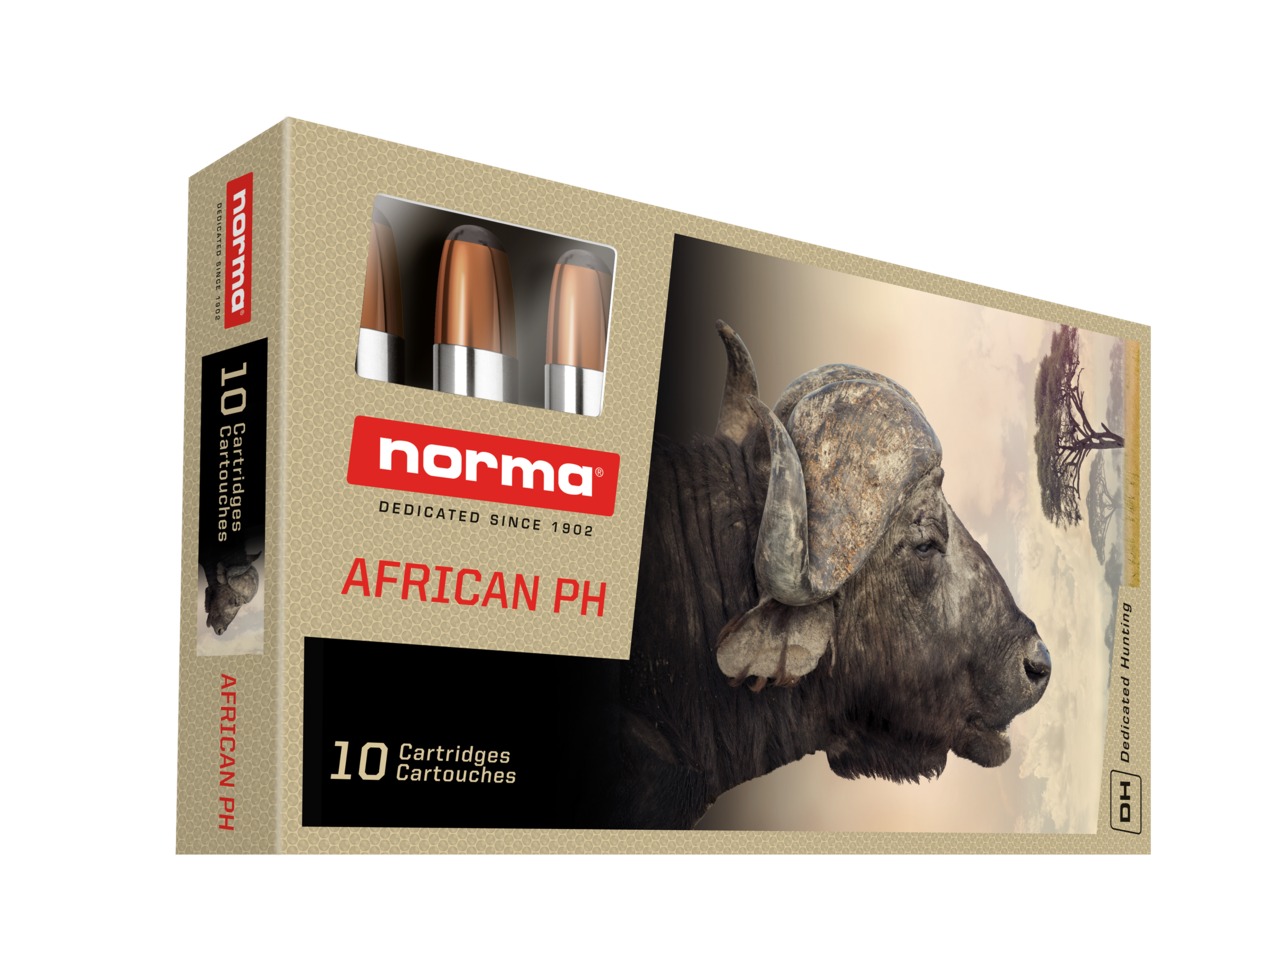 CART NORMA .416 RIGBY 400GR SOLID BTE 10 ref 20110762 NORMA